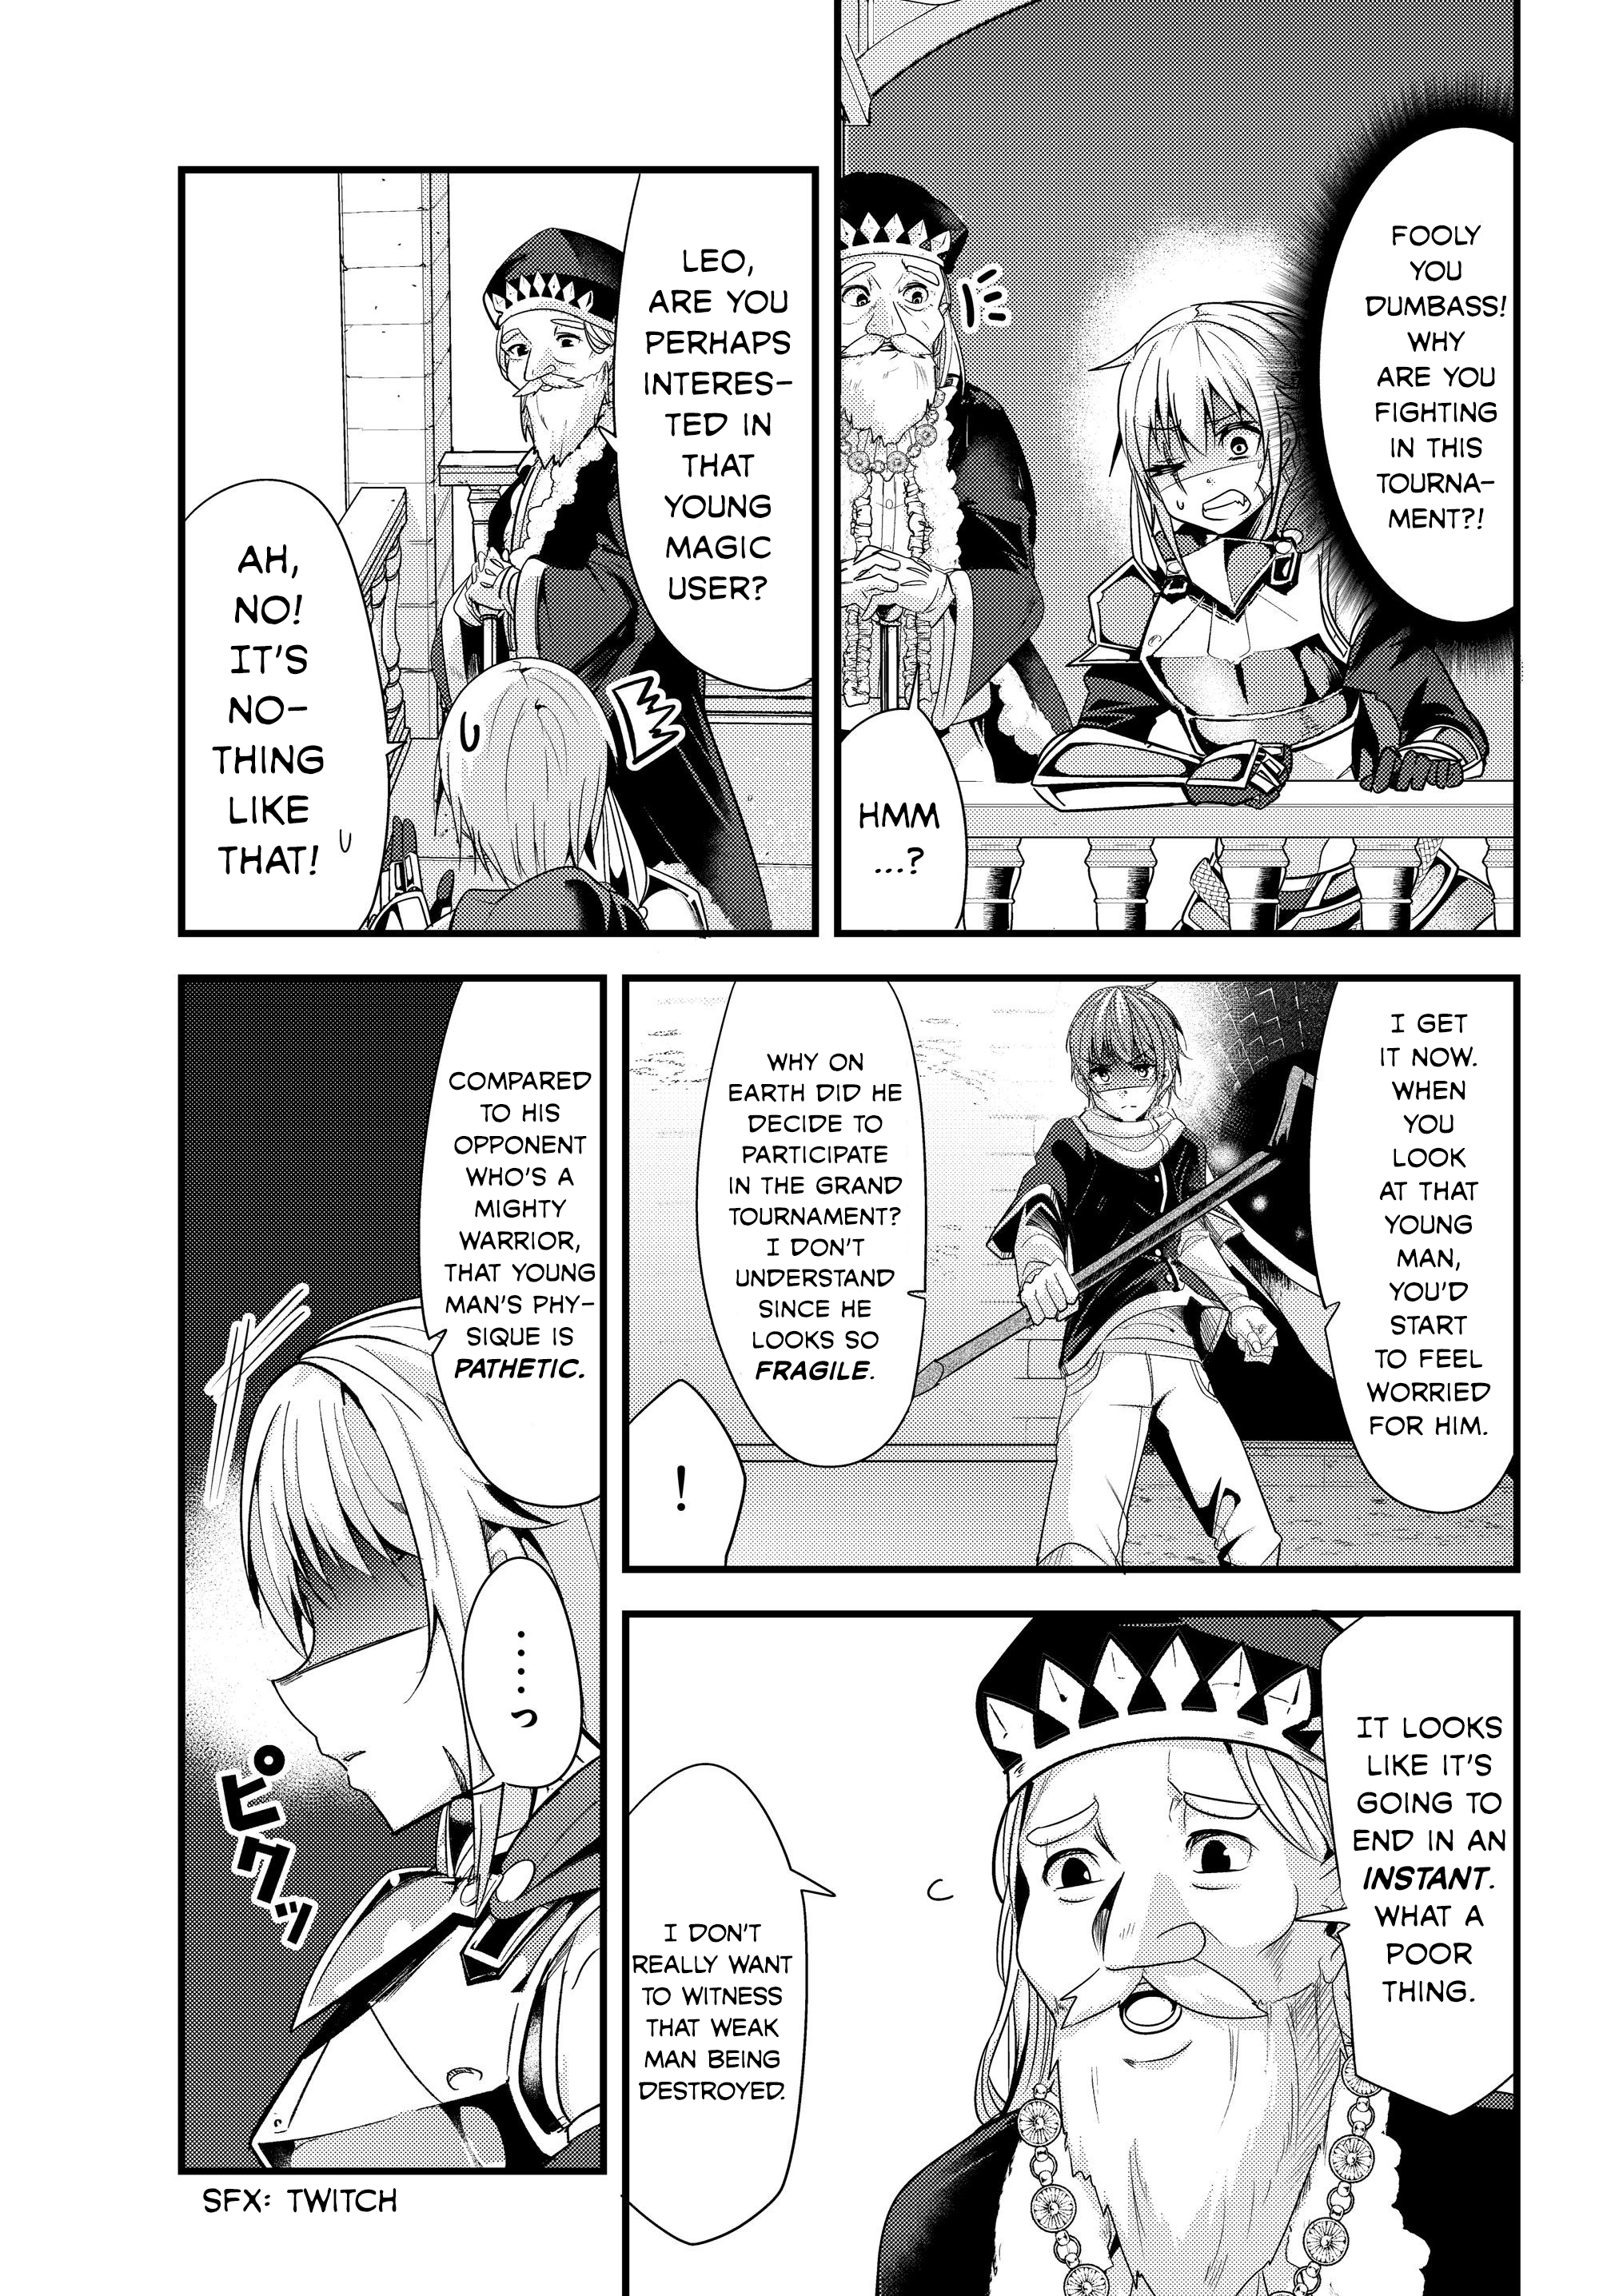 A Story About Treating A Female Knight Who Has Never Been Treated As A Woman As A Woman - Page 1